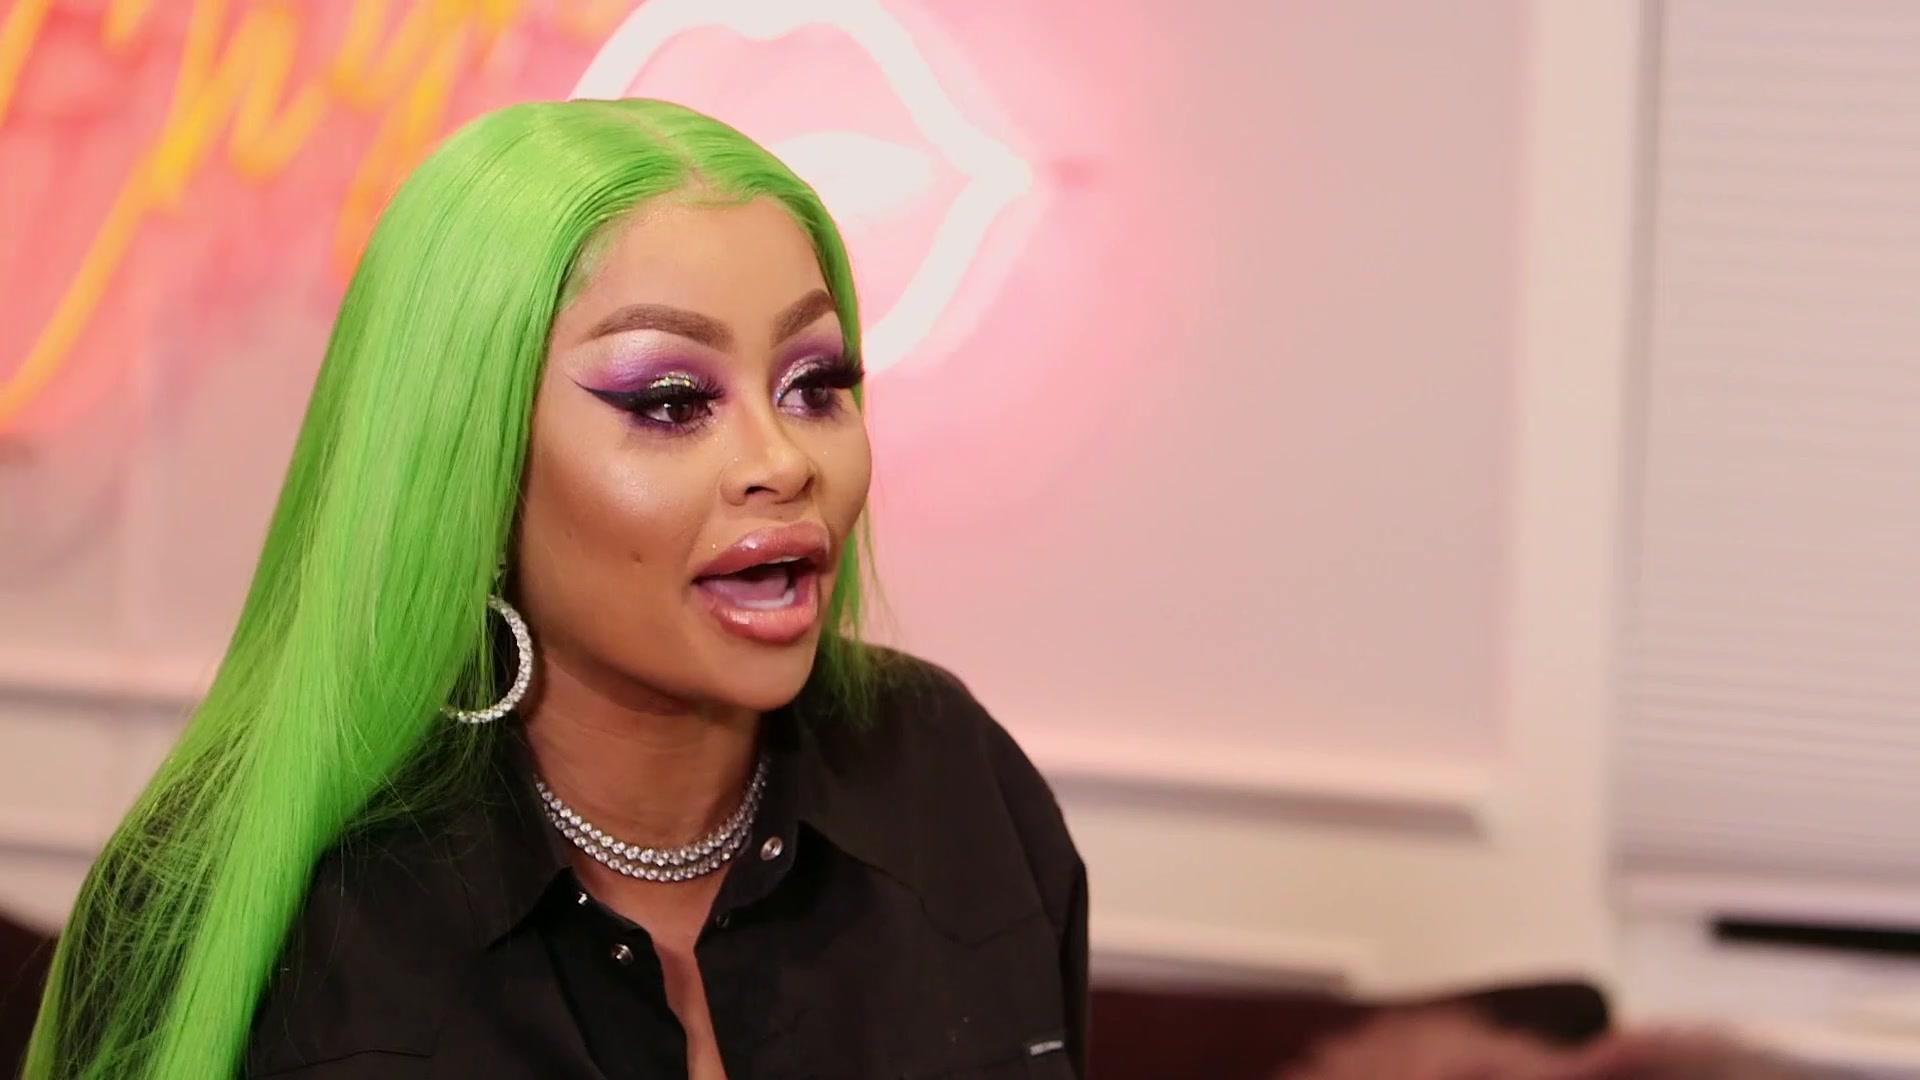 Watch 'You're A Bum Ass B*tch!' | The Real Blac Chyna Video Extras